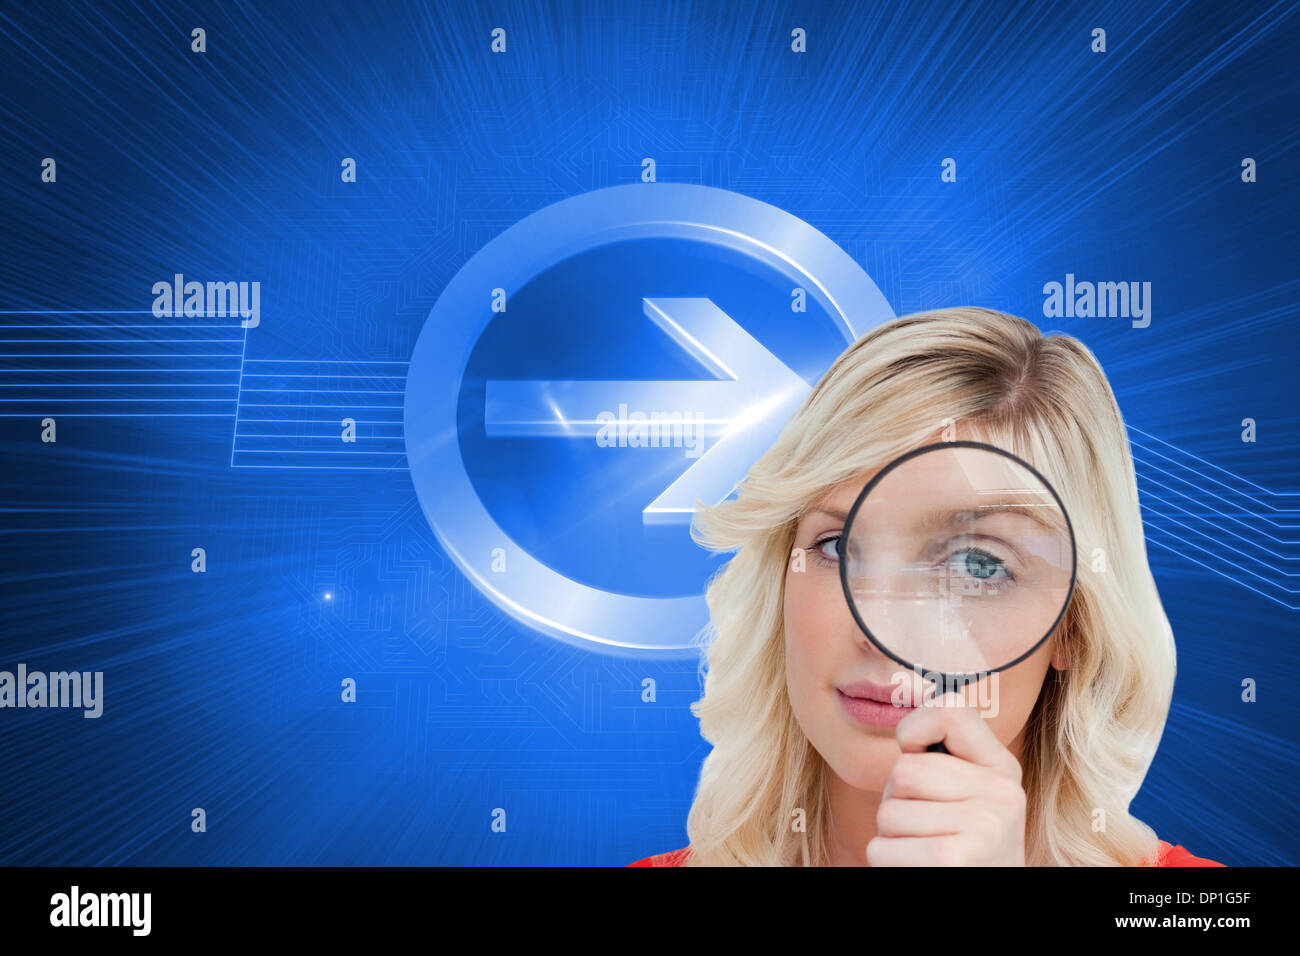 Composite image of fair-haired woman looking through a magnifying glass Stock Photo